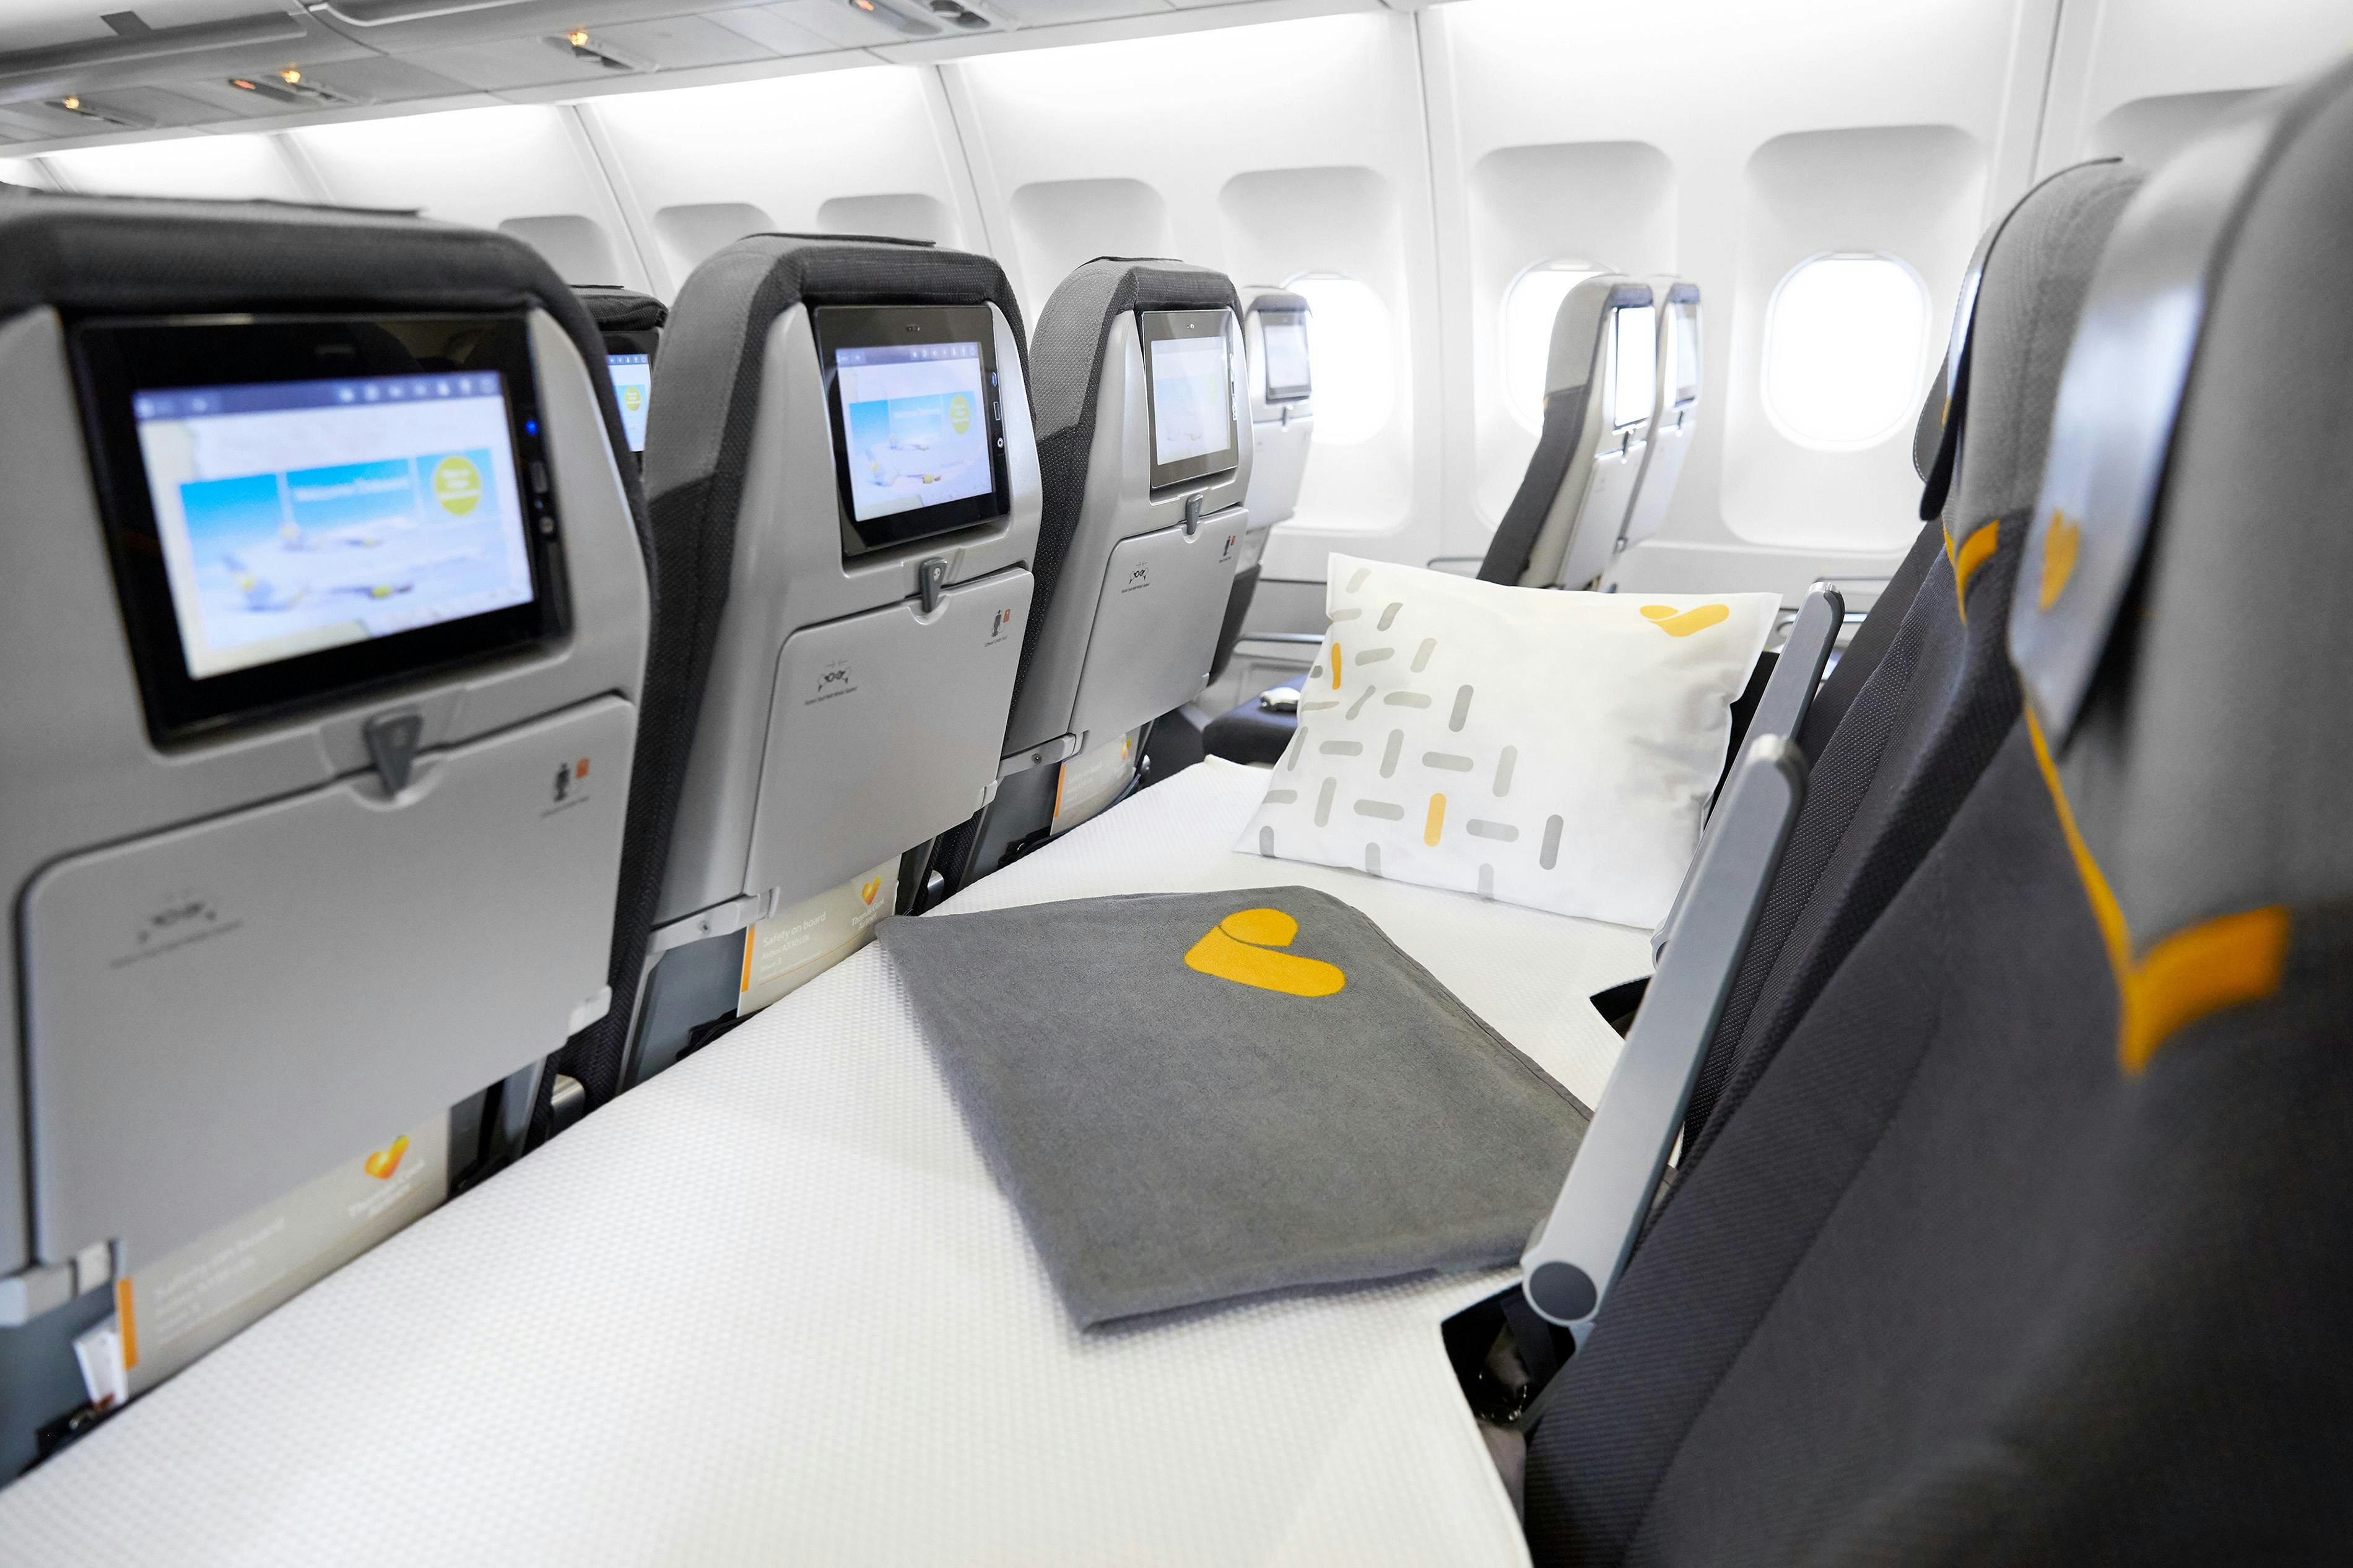 Sleep in a bed in economy class on long-haul flights - Lonely Planet